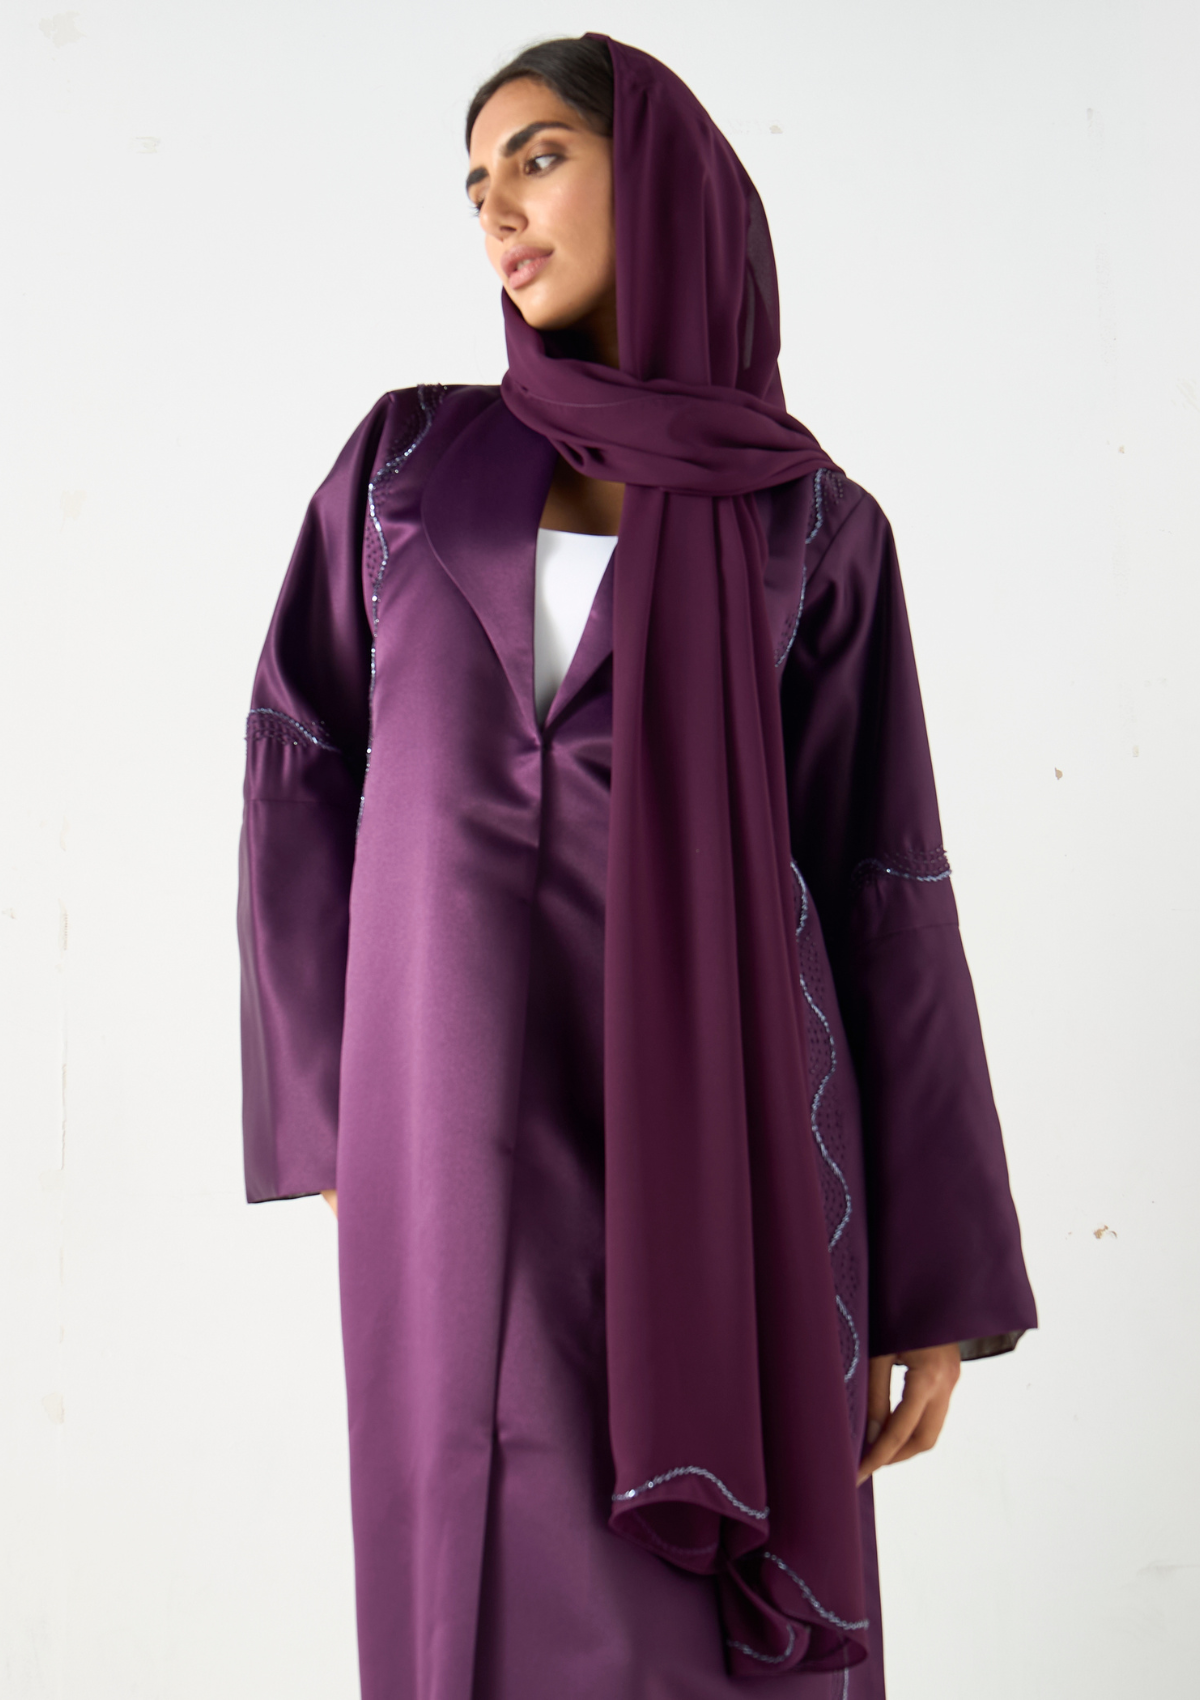 Embellished Abaya with Lapel Detail and Hijab